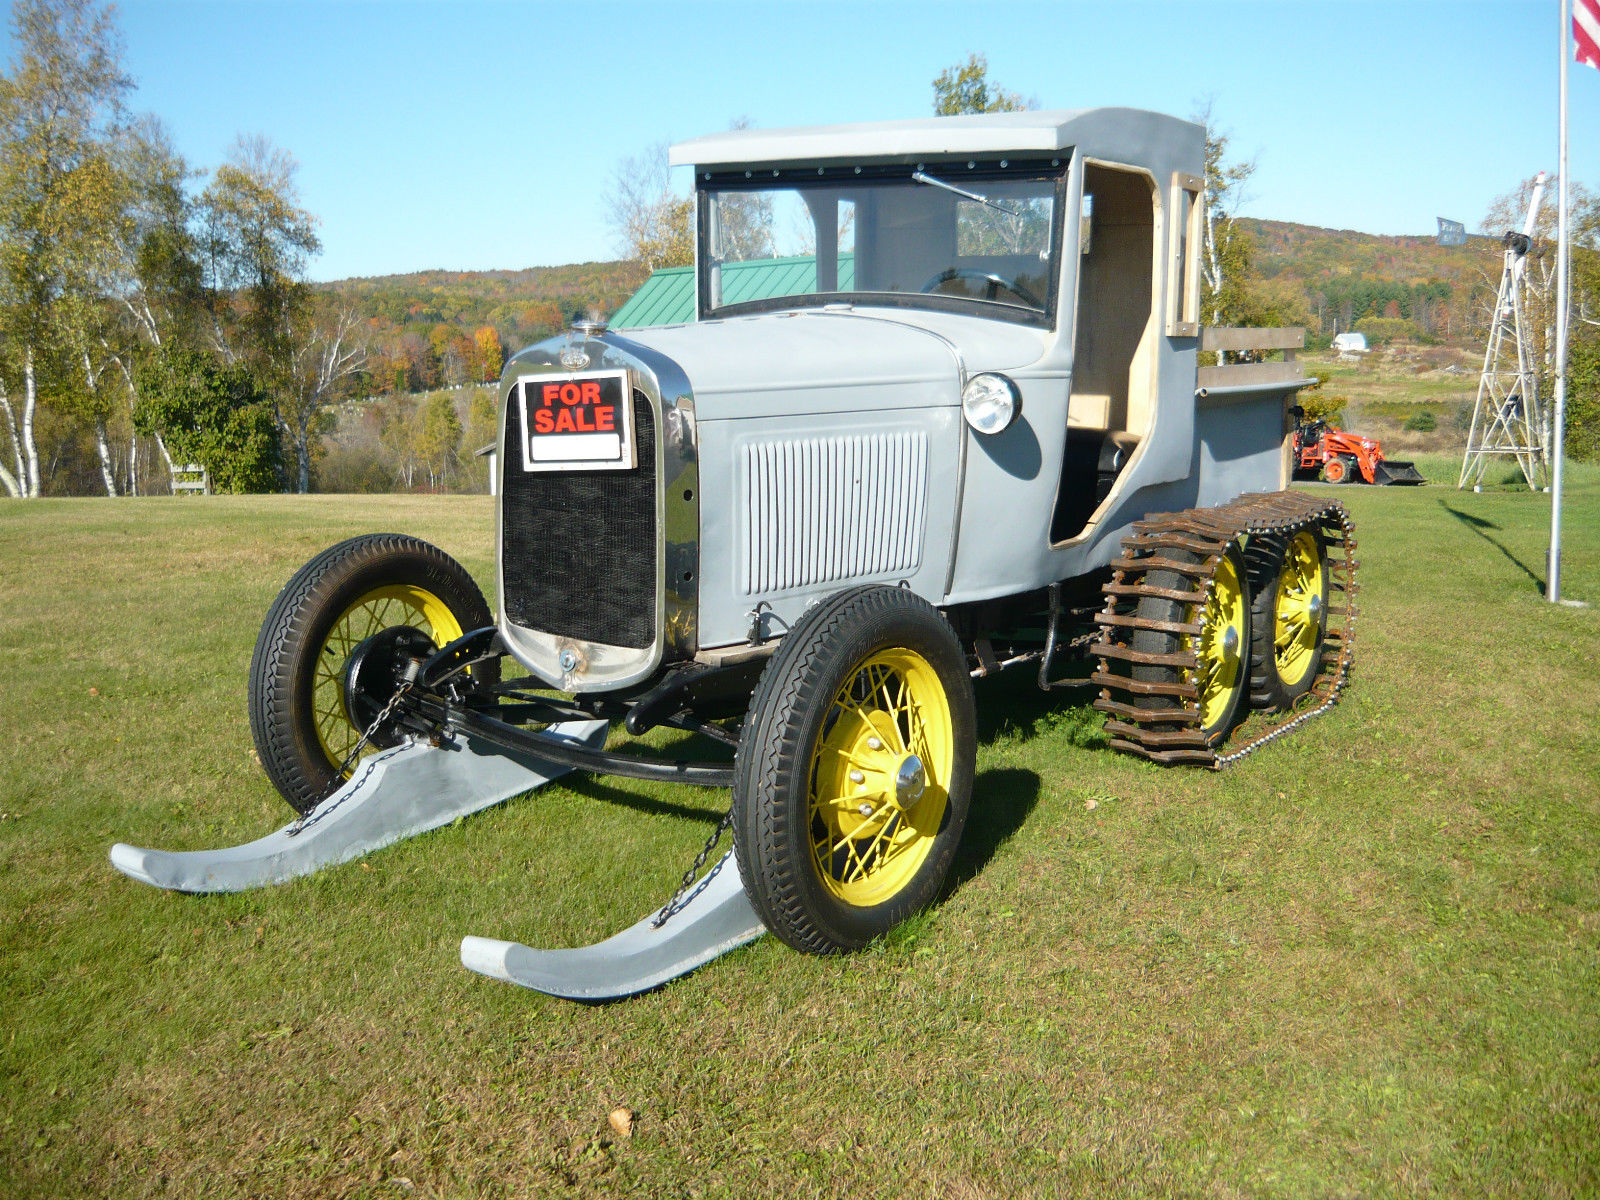 Ford Model A truck w/Snowbird snowmobile conversion kit for sale in Canaan, Maine, United States